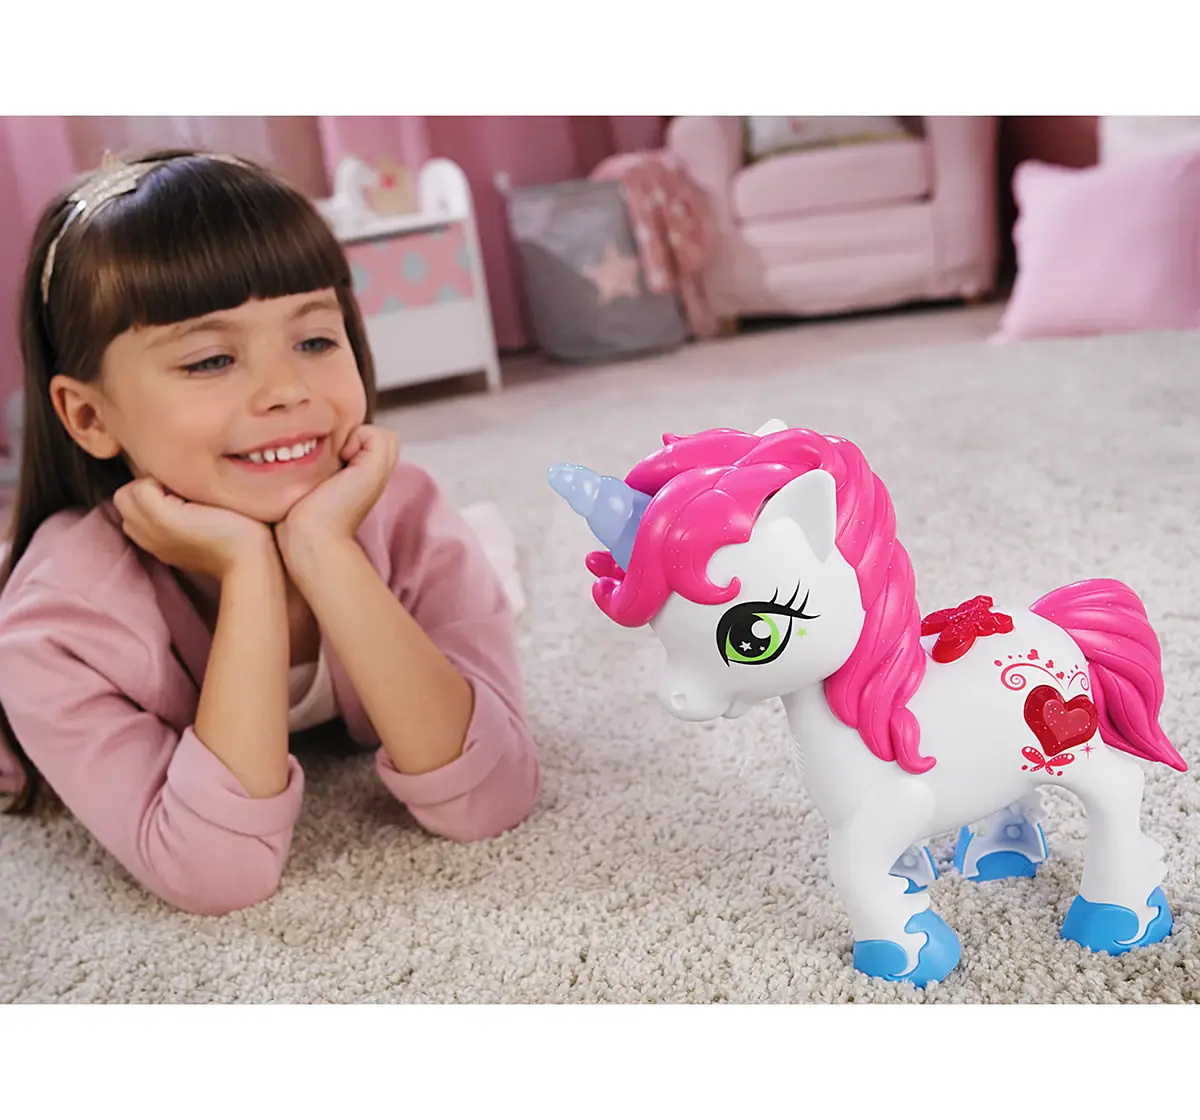 Dragon I Little Unicorn Touch and Talk Electronic Dinosaur Toys for Kids 2Y+, Multicolour